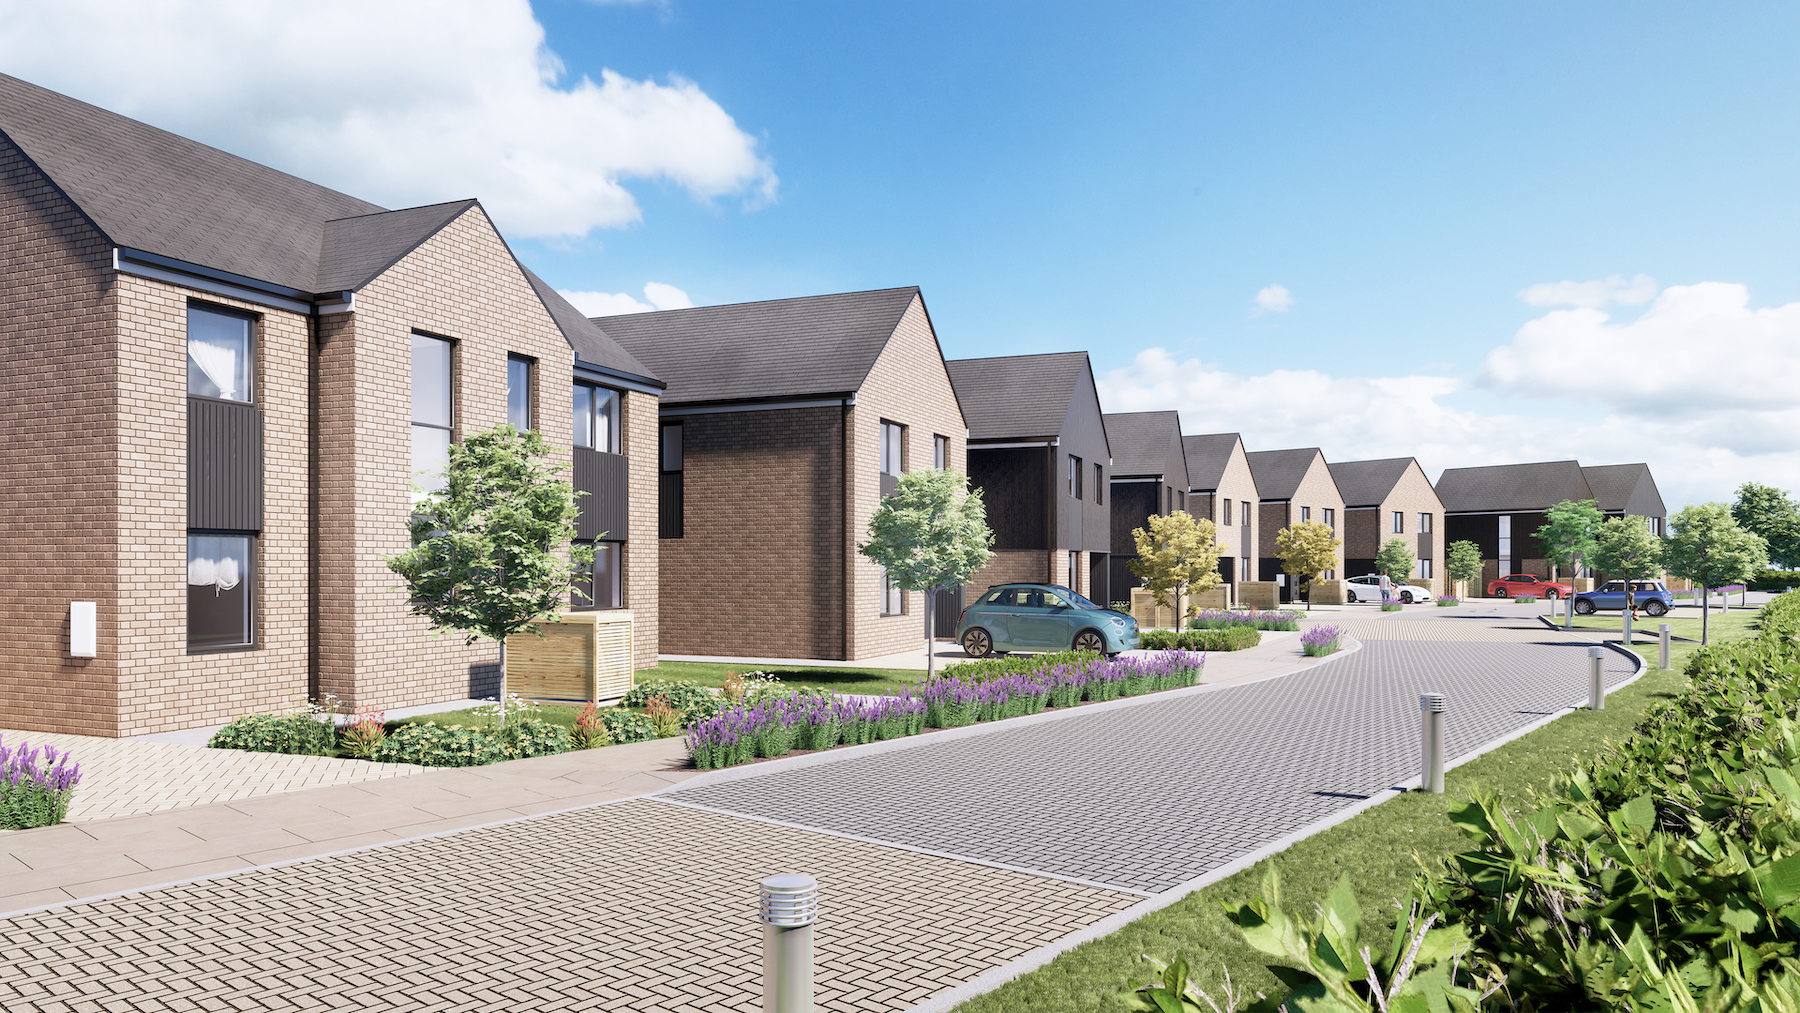 Render of property development street in Sussex - row of 10 houses with driveways and each with different interior design and architecture